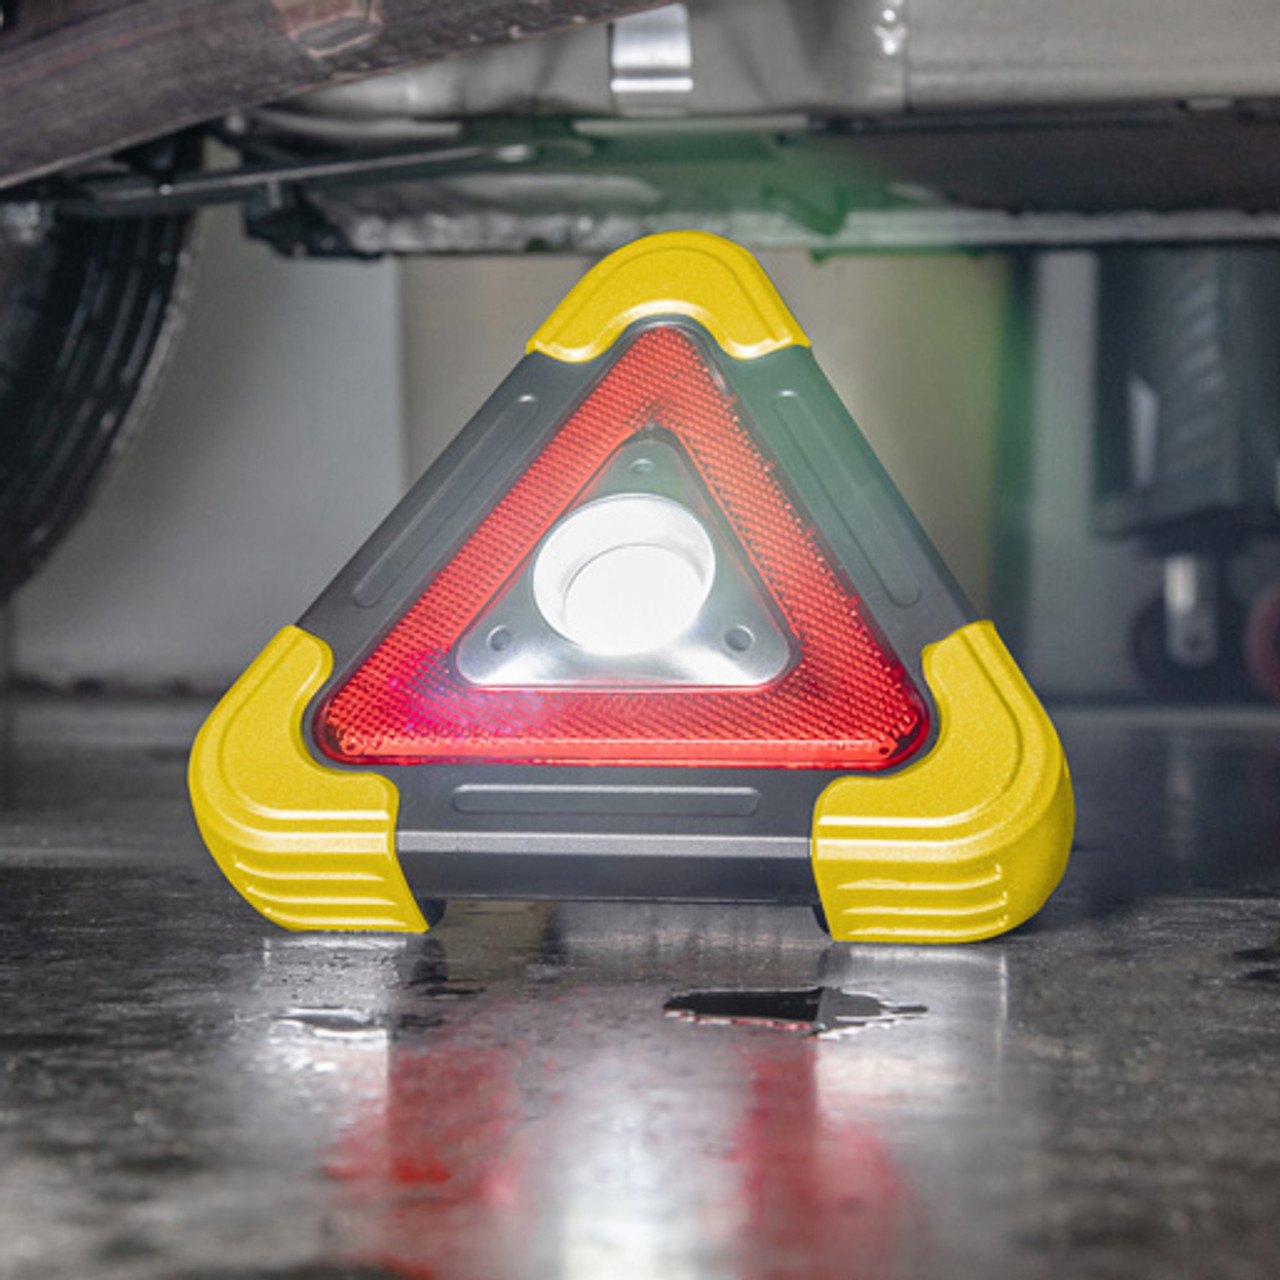 Warning Lights Improve Workplace Safety